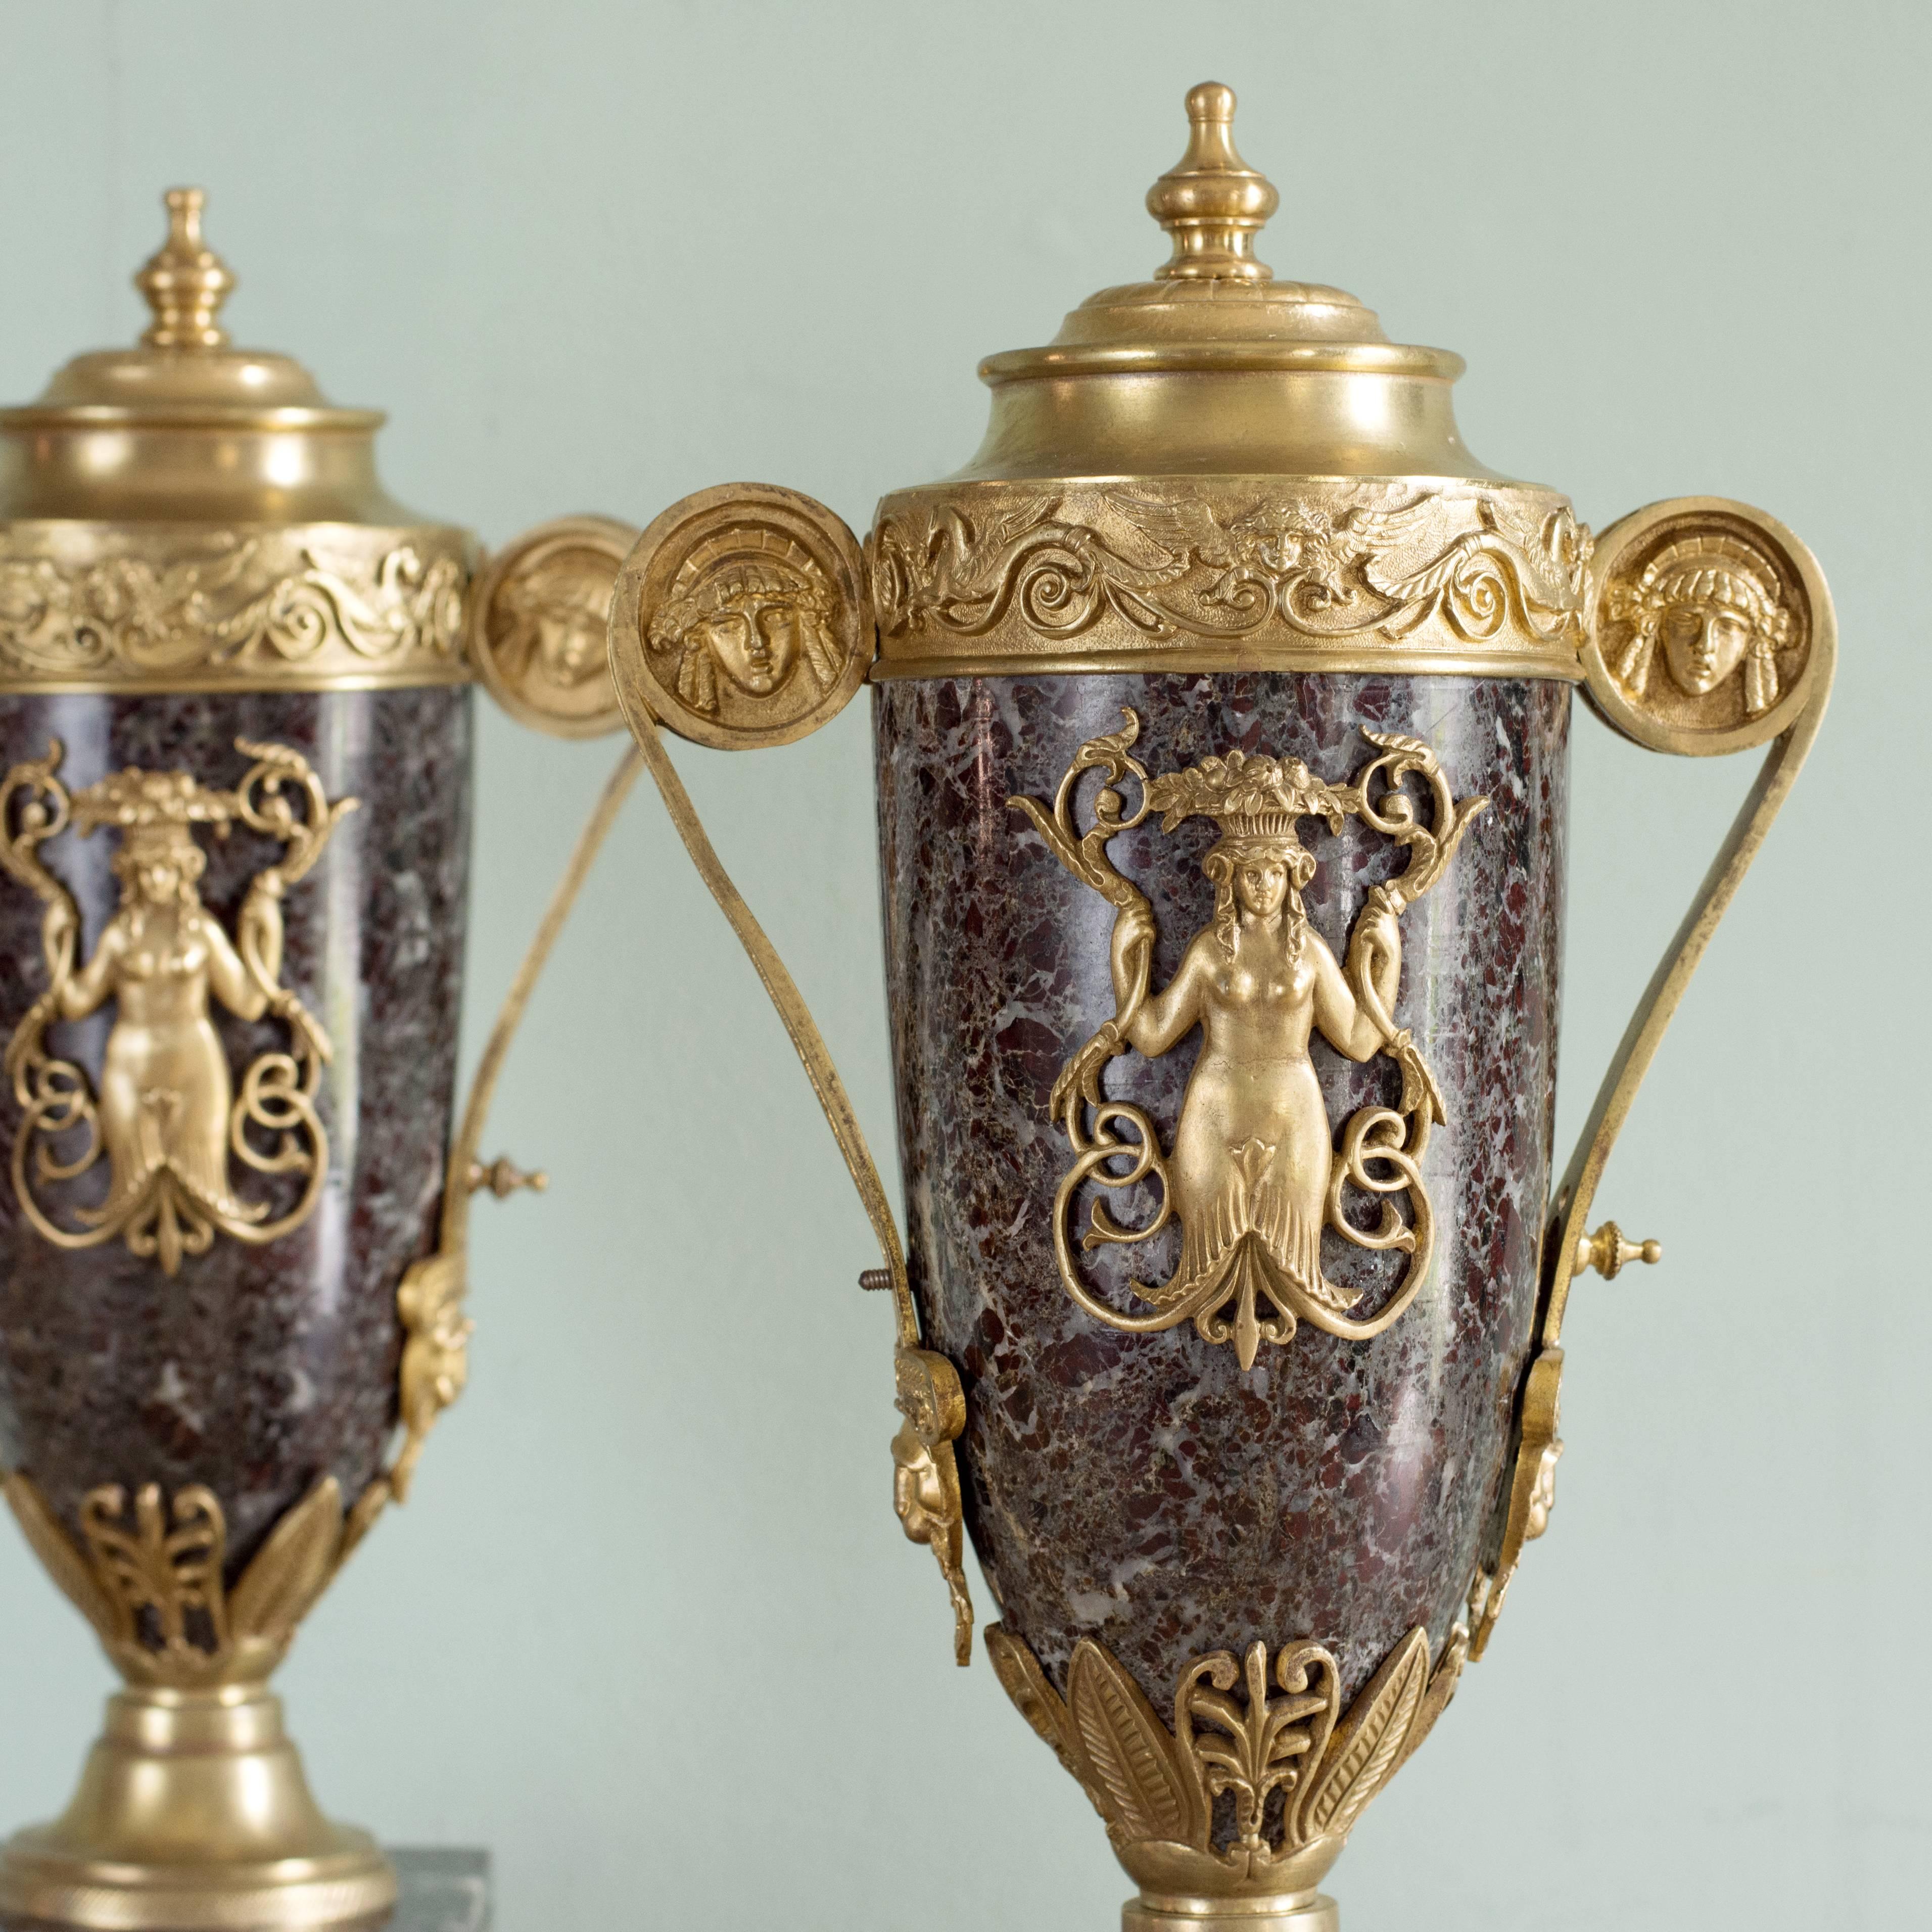 A pair of neoclassical style cassolettes, early 20th century, gilt bronze-mounted on variegated marble.

Dimensions: 46cm (18